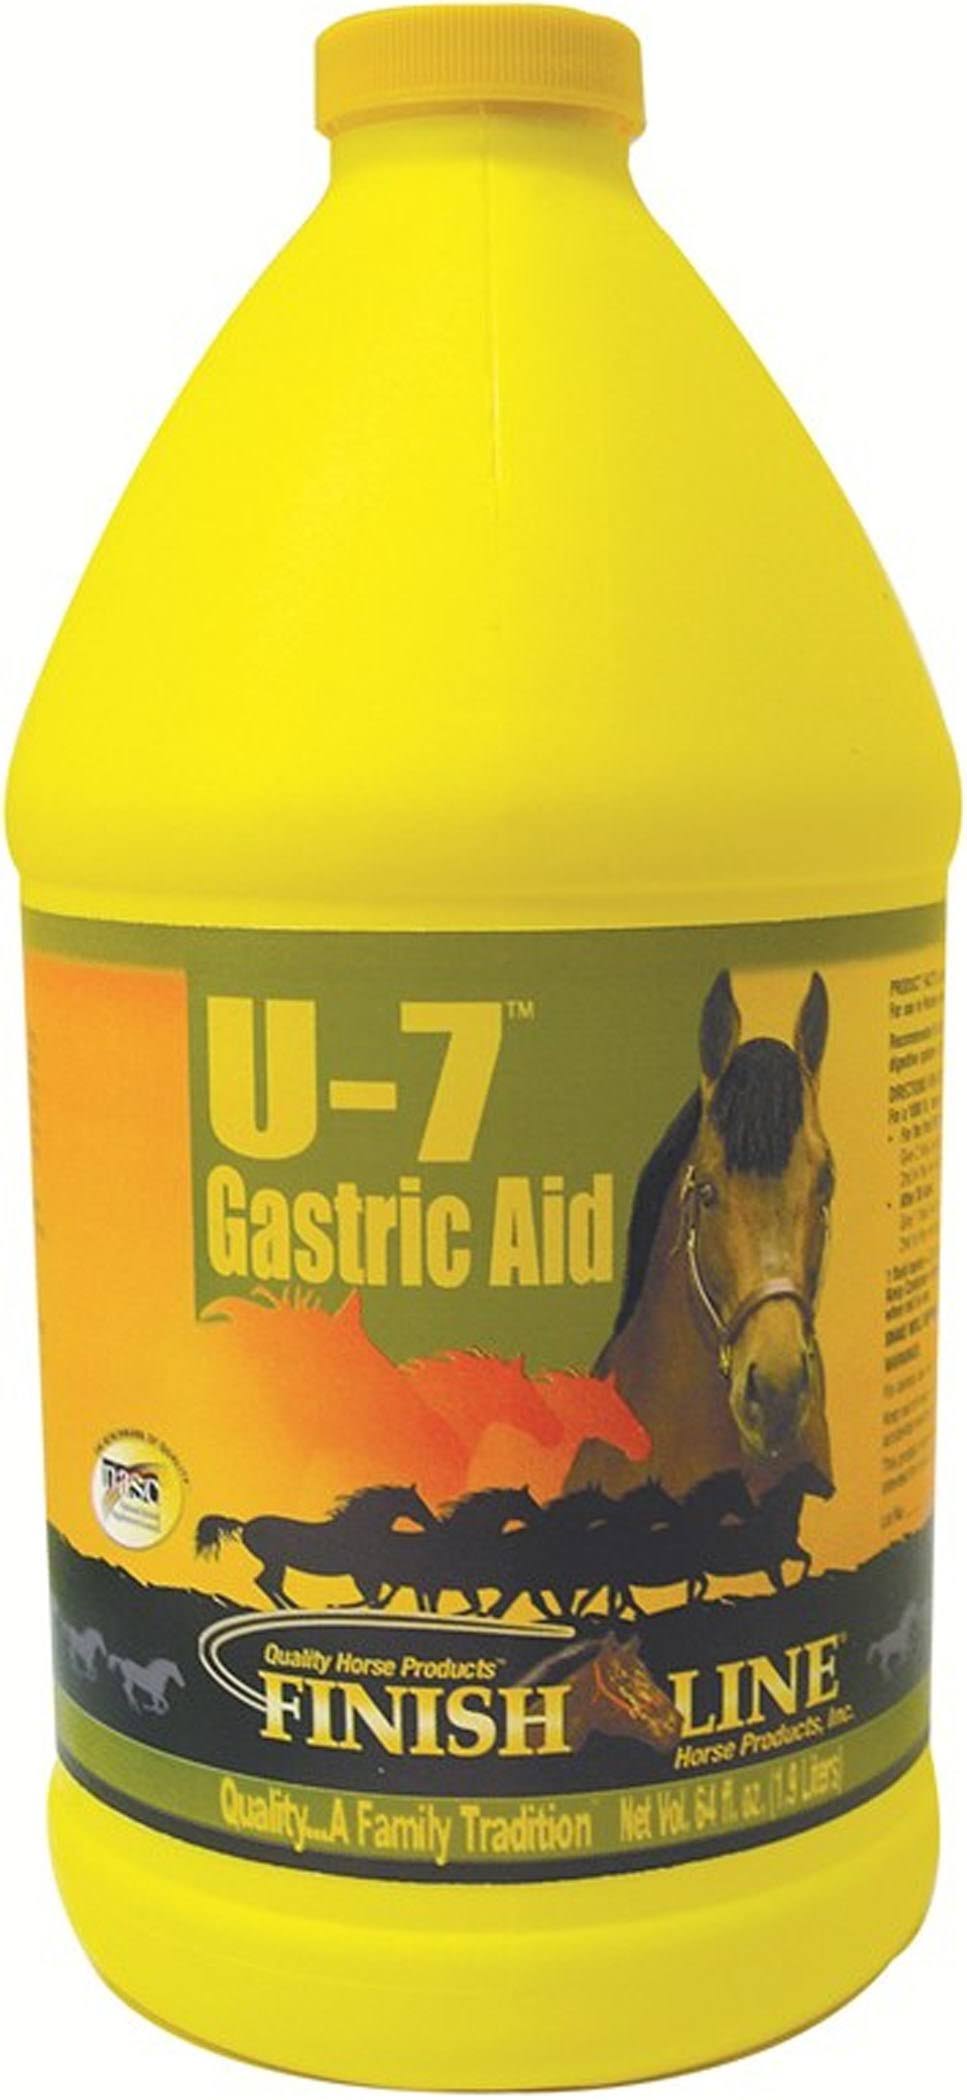 Finish Line Gastric Aid Dietary Supplement - 64oz